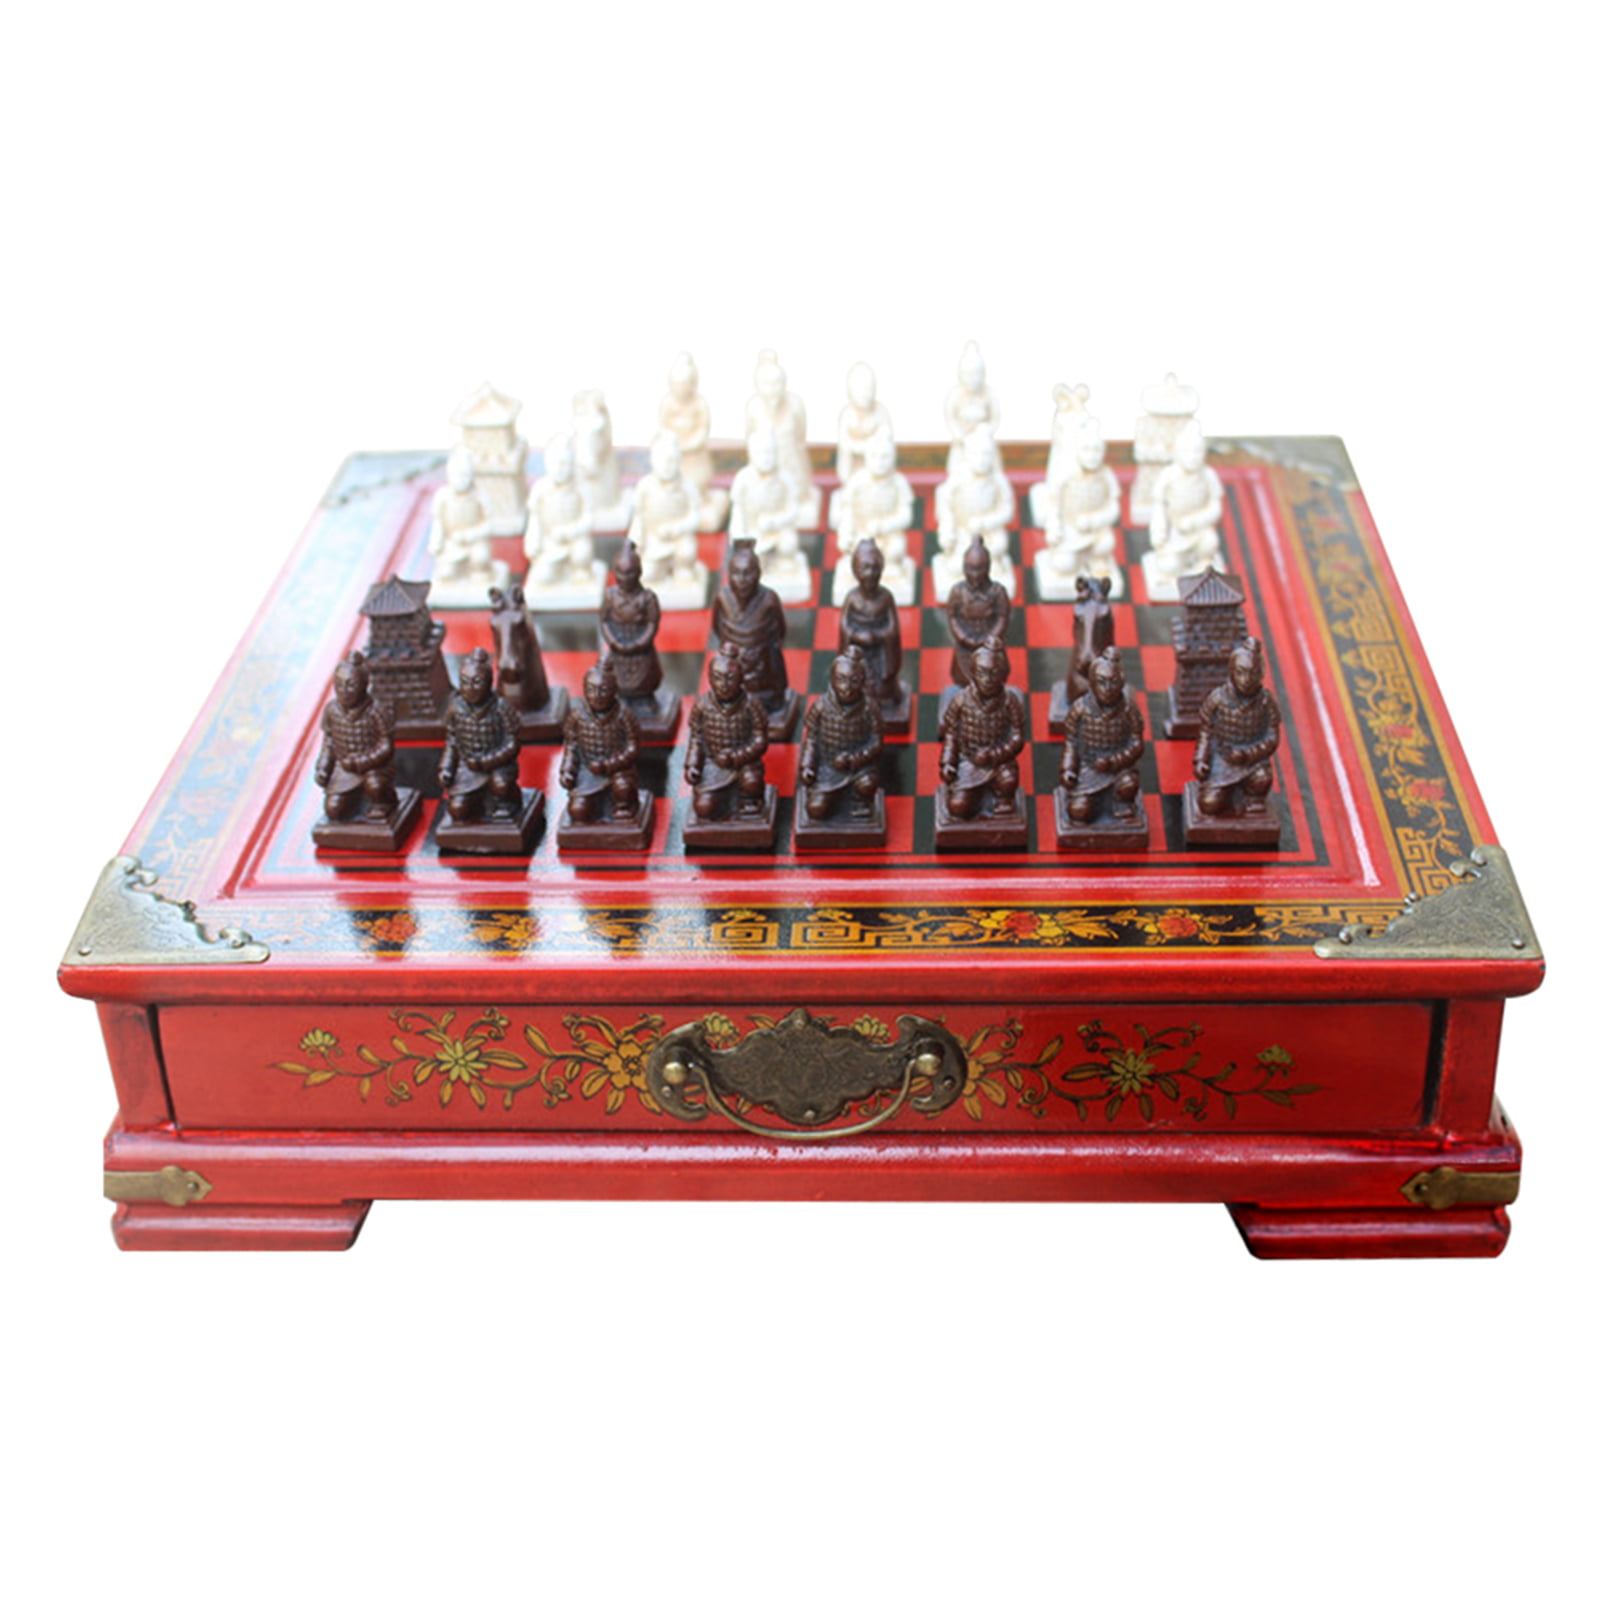 Retro Vintage Wooden Chinese Style Chess Board Table Games Set Pieces Gift US 